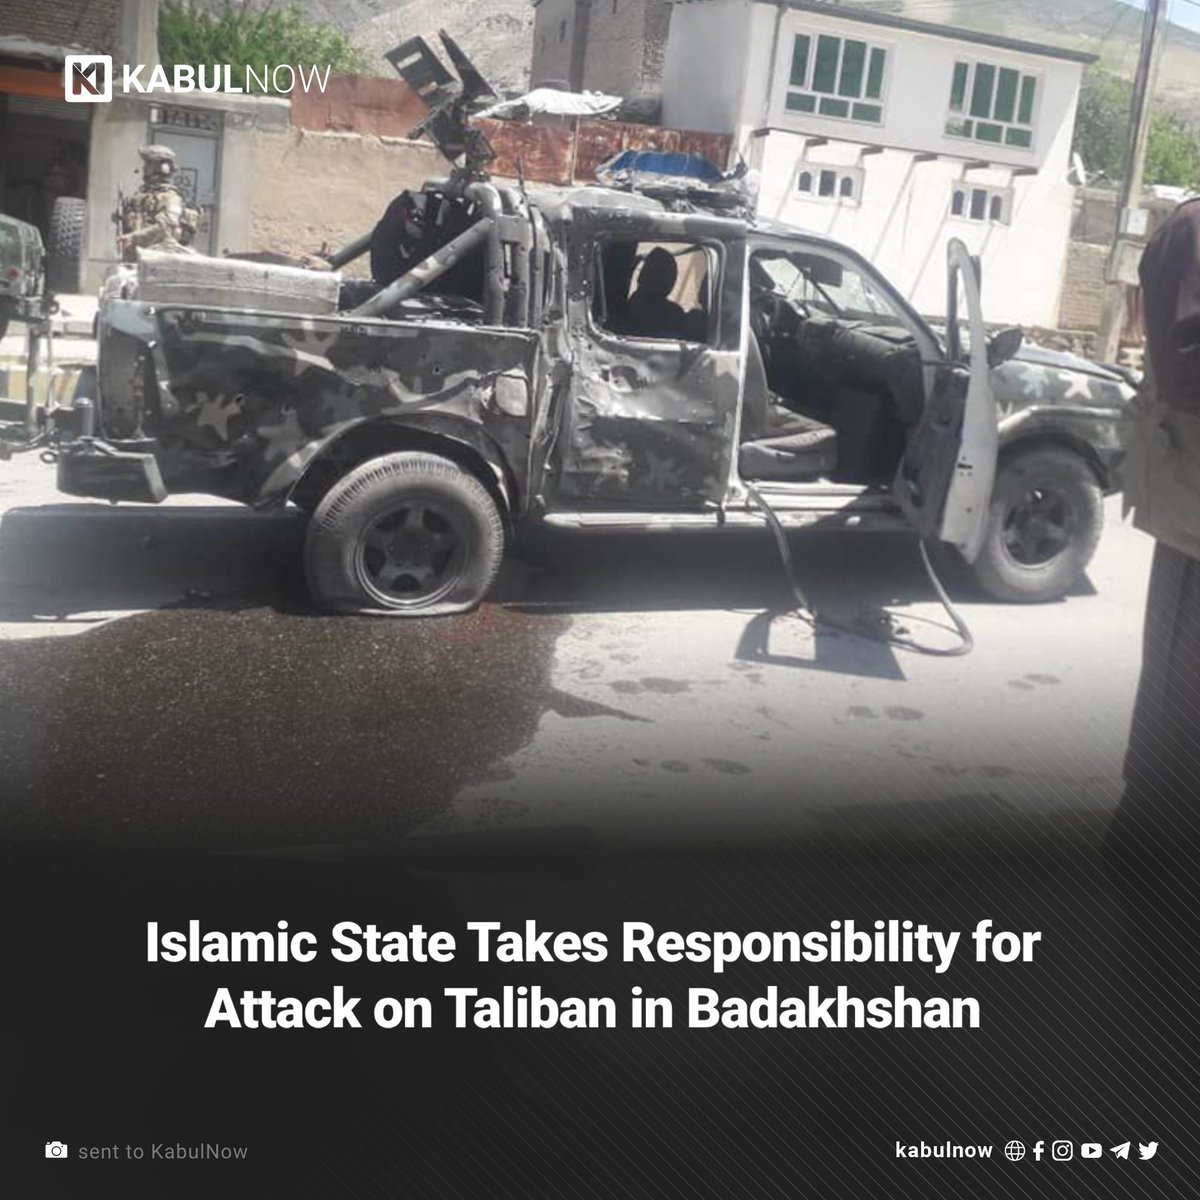 The local branch of Islamic State, IS-KP, has claimed responsibility for the attack on a Taliban convoy in northeastern Badakhshan province, saying it killed and injured at least 12 Taliban members. Read more here: kabulnow.com/?p=35637